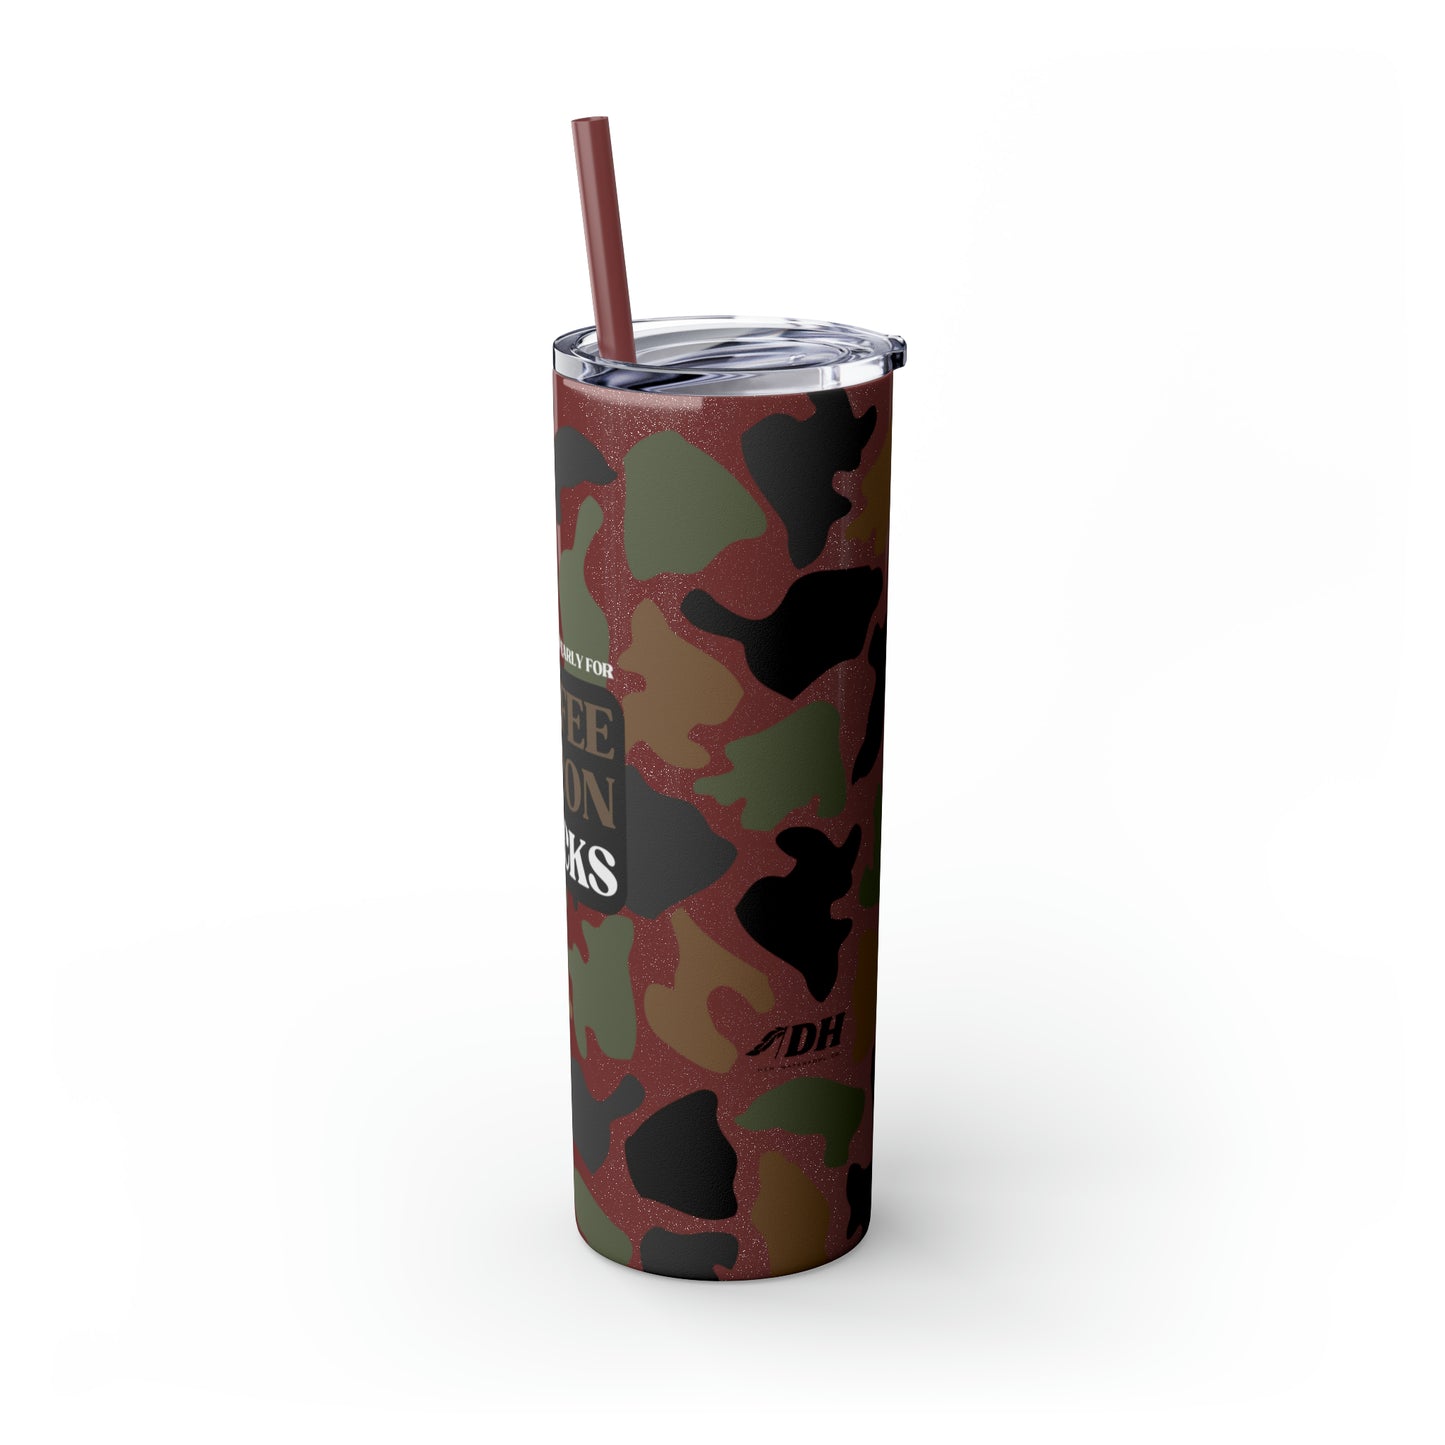 Coffee, Bacon & BUCKS Skinny Tumbler with Straw (Multiple Colors)